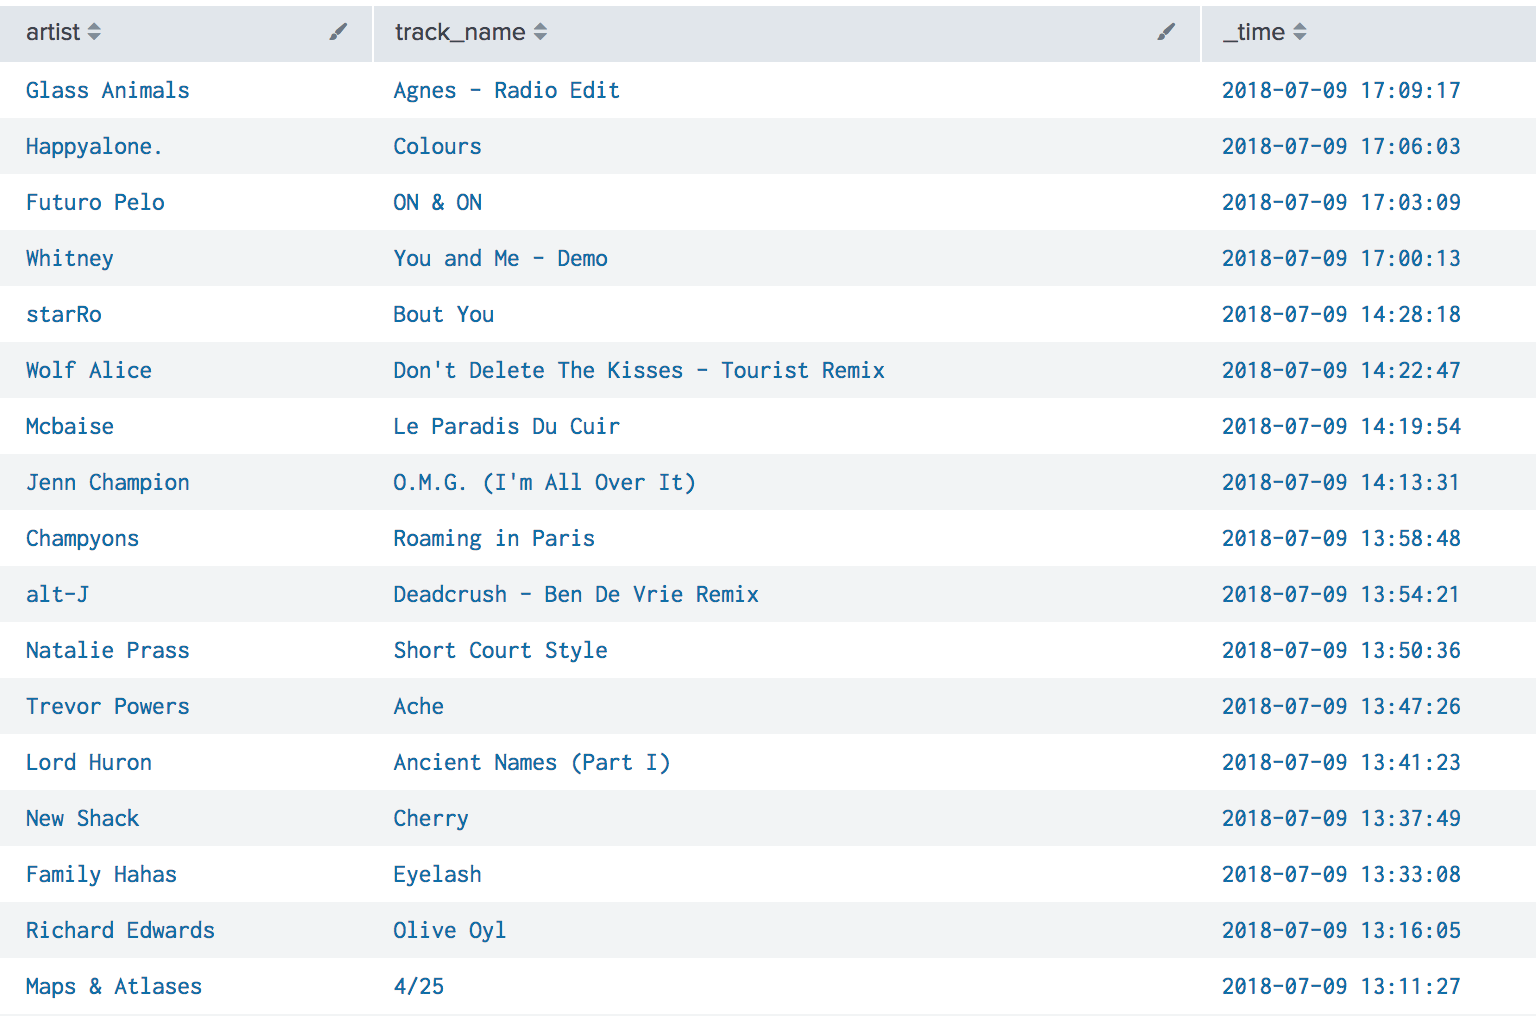 Screen capture showing Splunk search results of artist, track_name, and time from July 9th. Songs near Jenn Champion’s song in time include Mcbaise - Le Paradis Du Cuir, Wolf Alice - Don’t Delete the Kisses (Tourist Remix) and Champyons - Roaming in Paris.